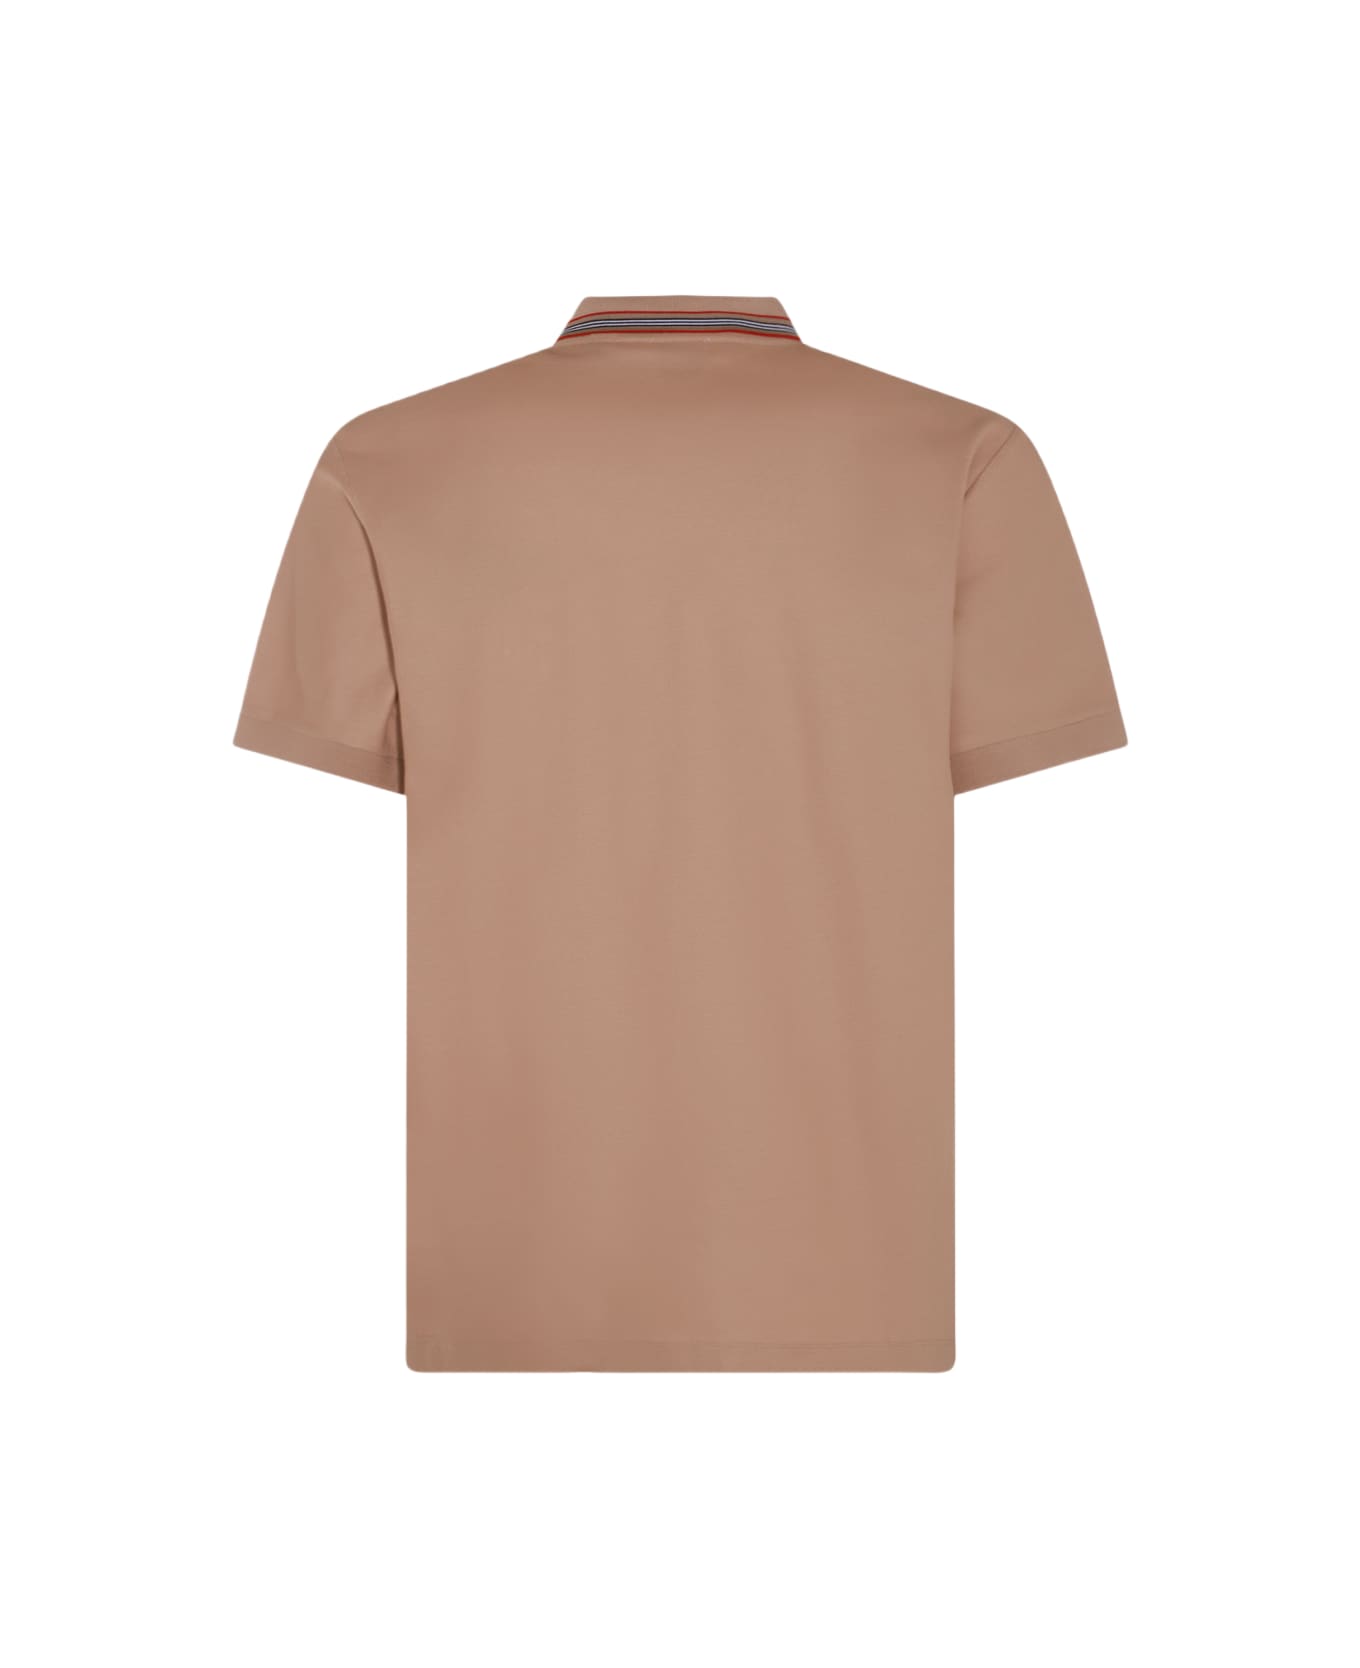 Burberry Beige Cotton Polo Shirt - SOFT FAWN ポロシャツ